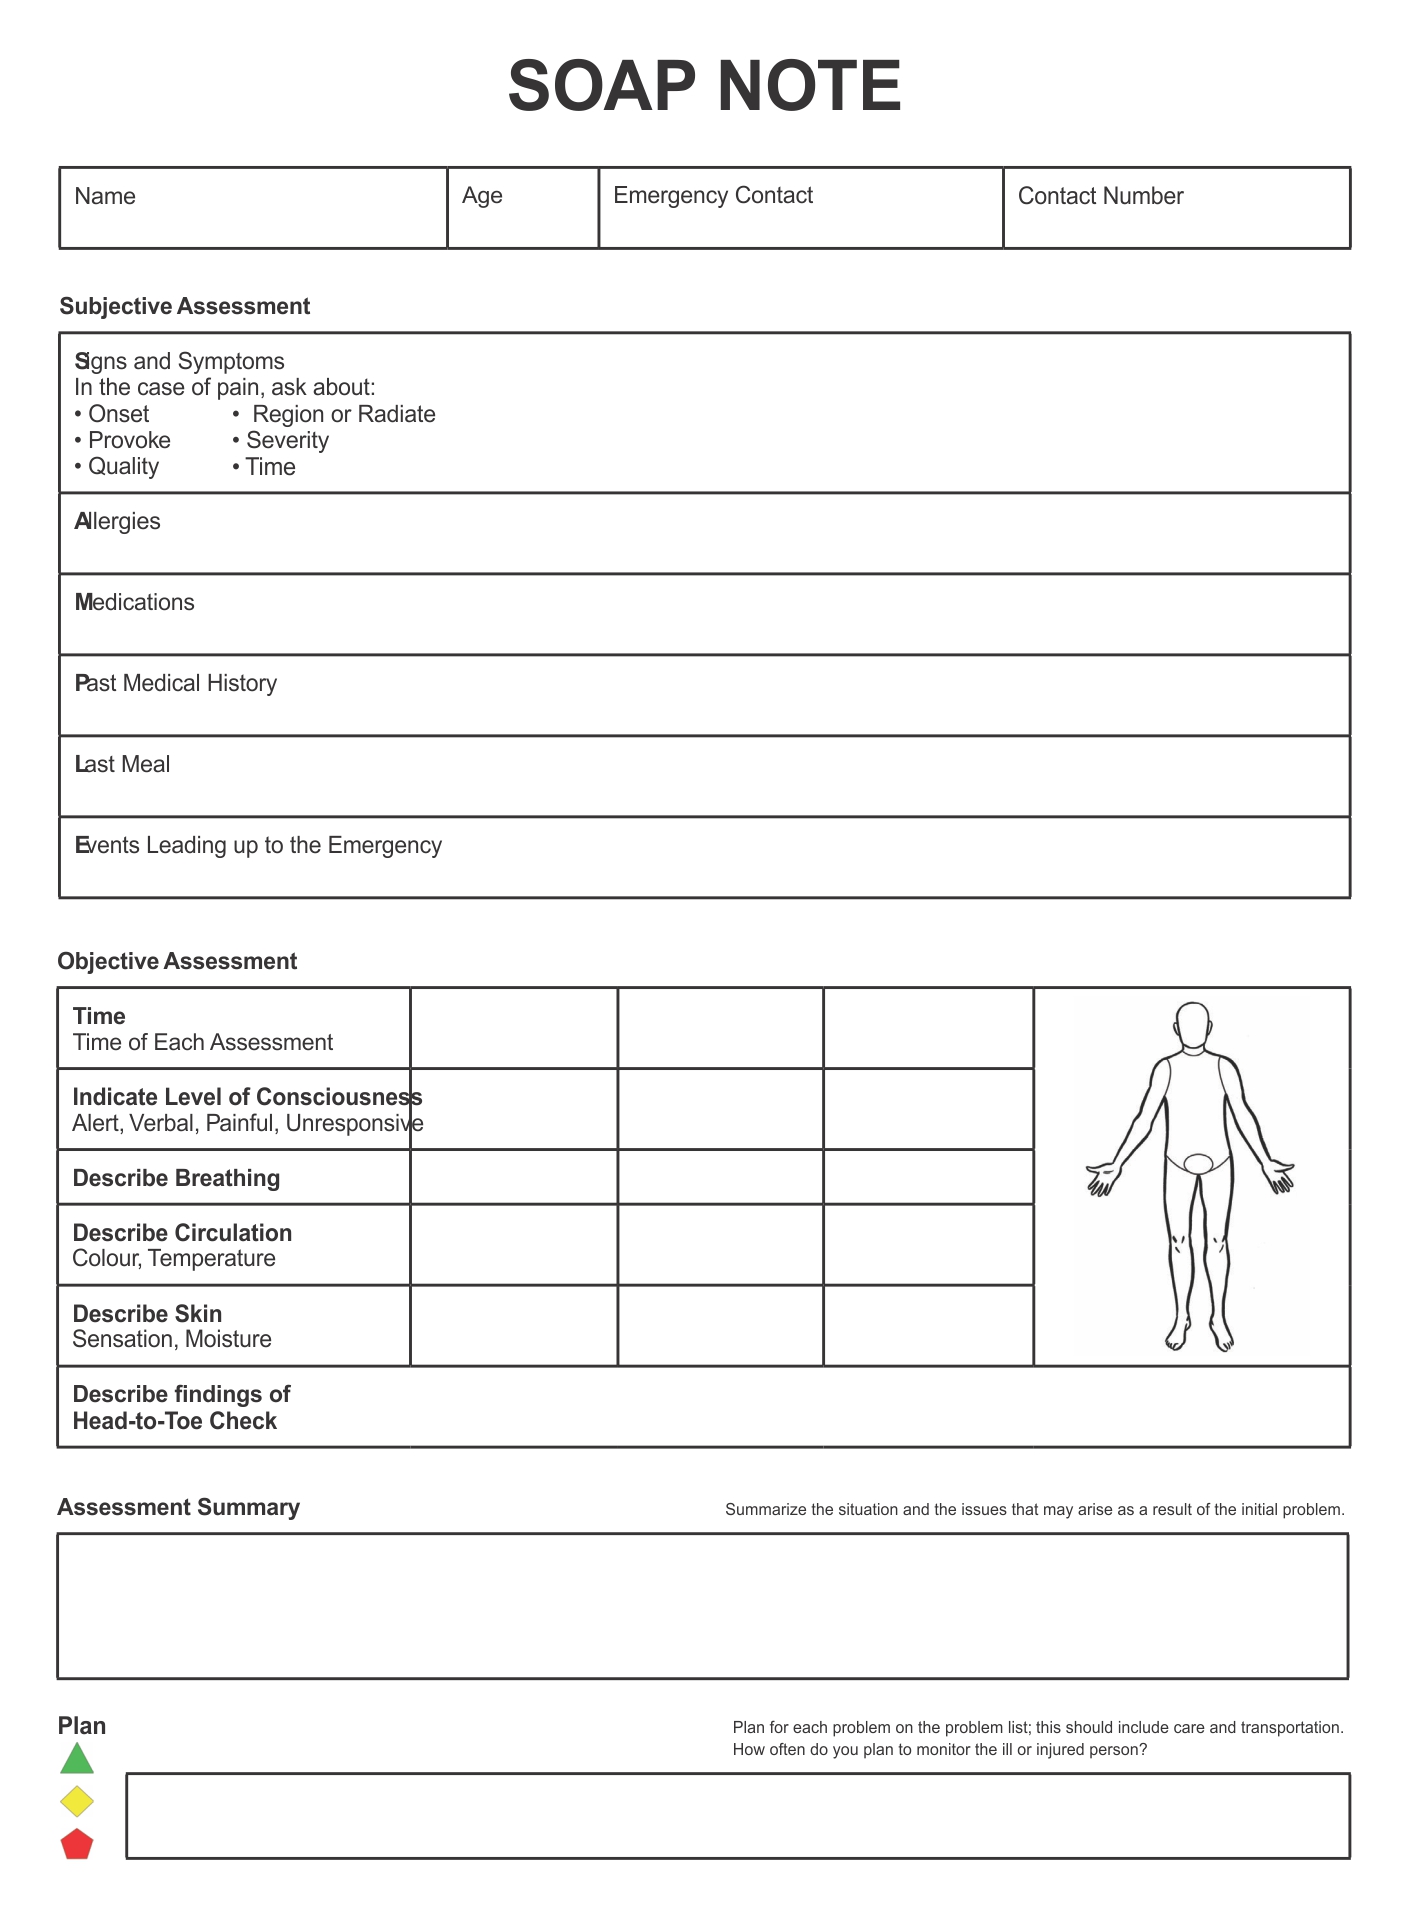 21 Best Printable Chiropractic Forms Soap Note - printablee.com Pertaining To Soap Report Template